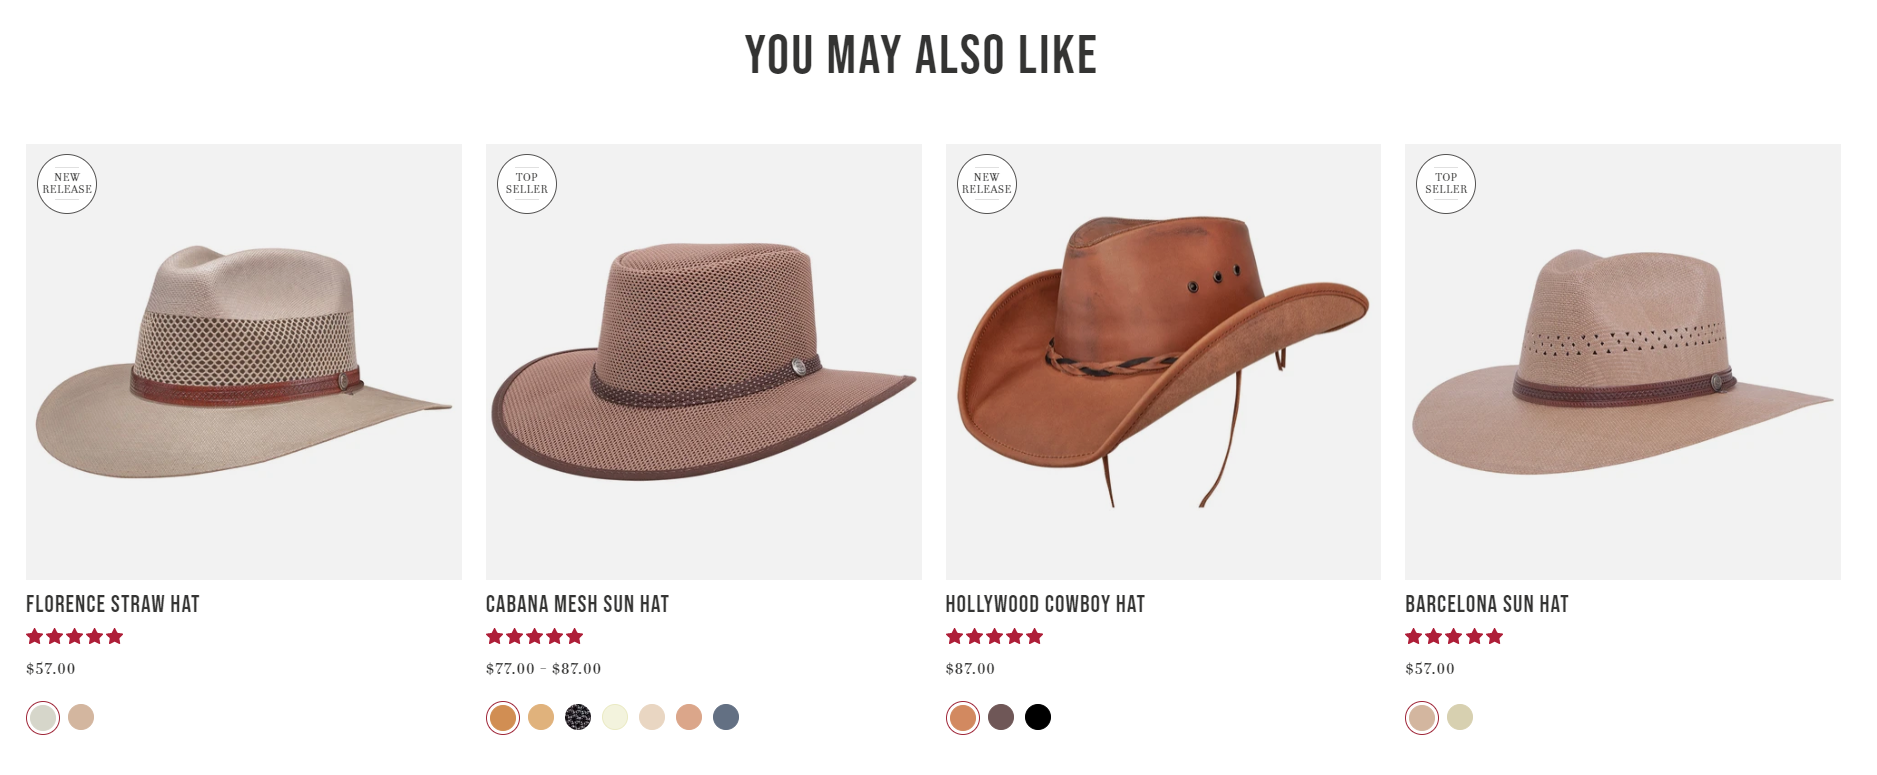 Findify Recommendations in action for American Hat Makers.